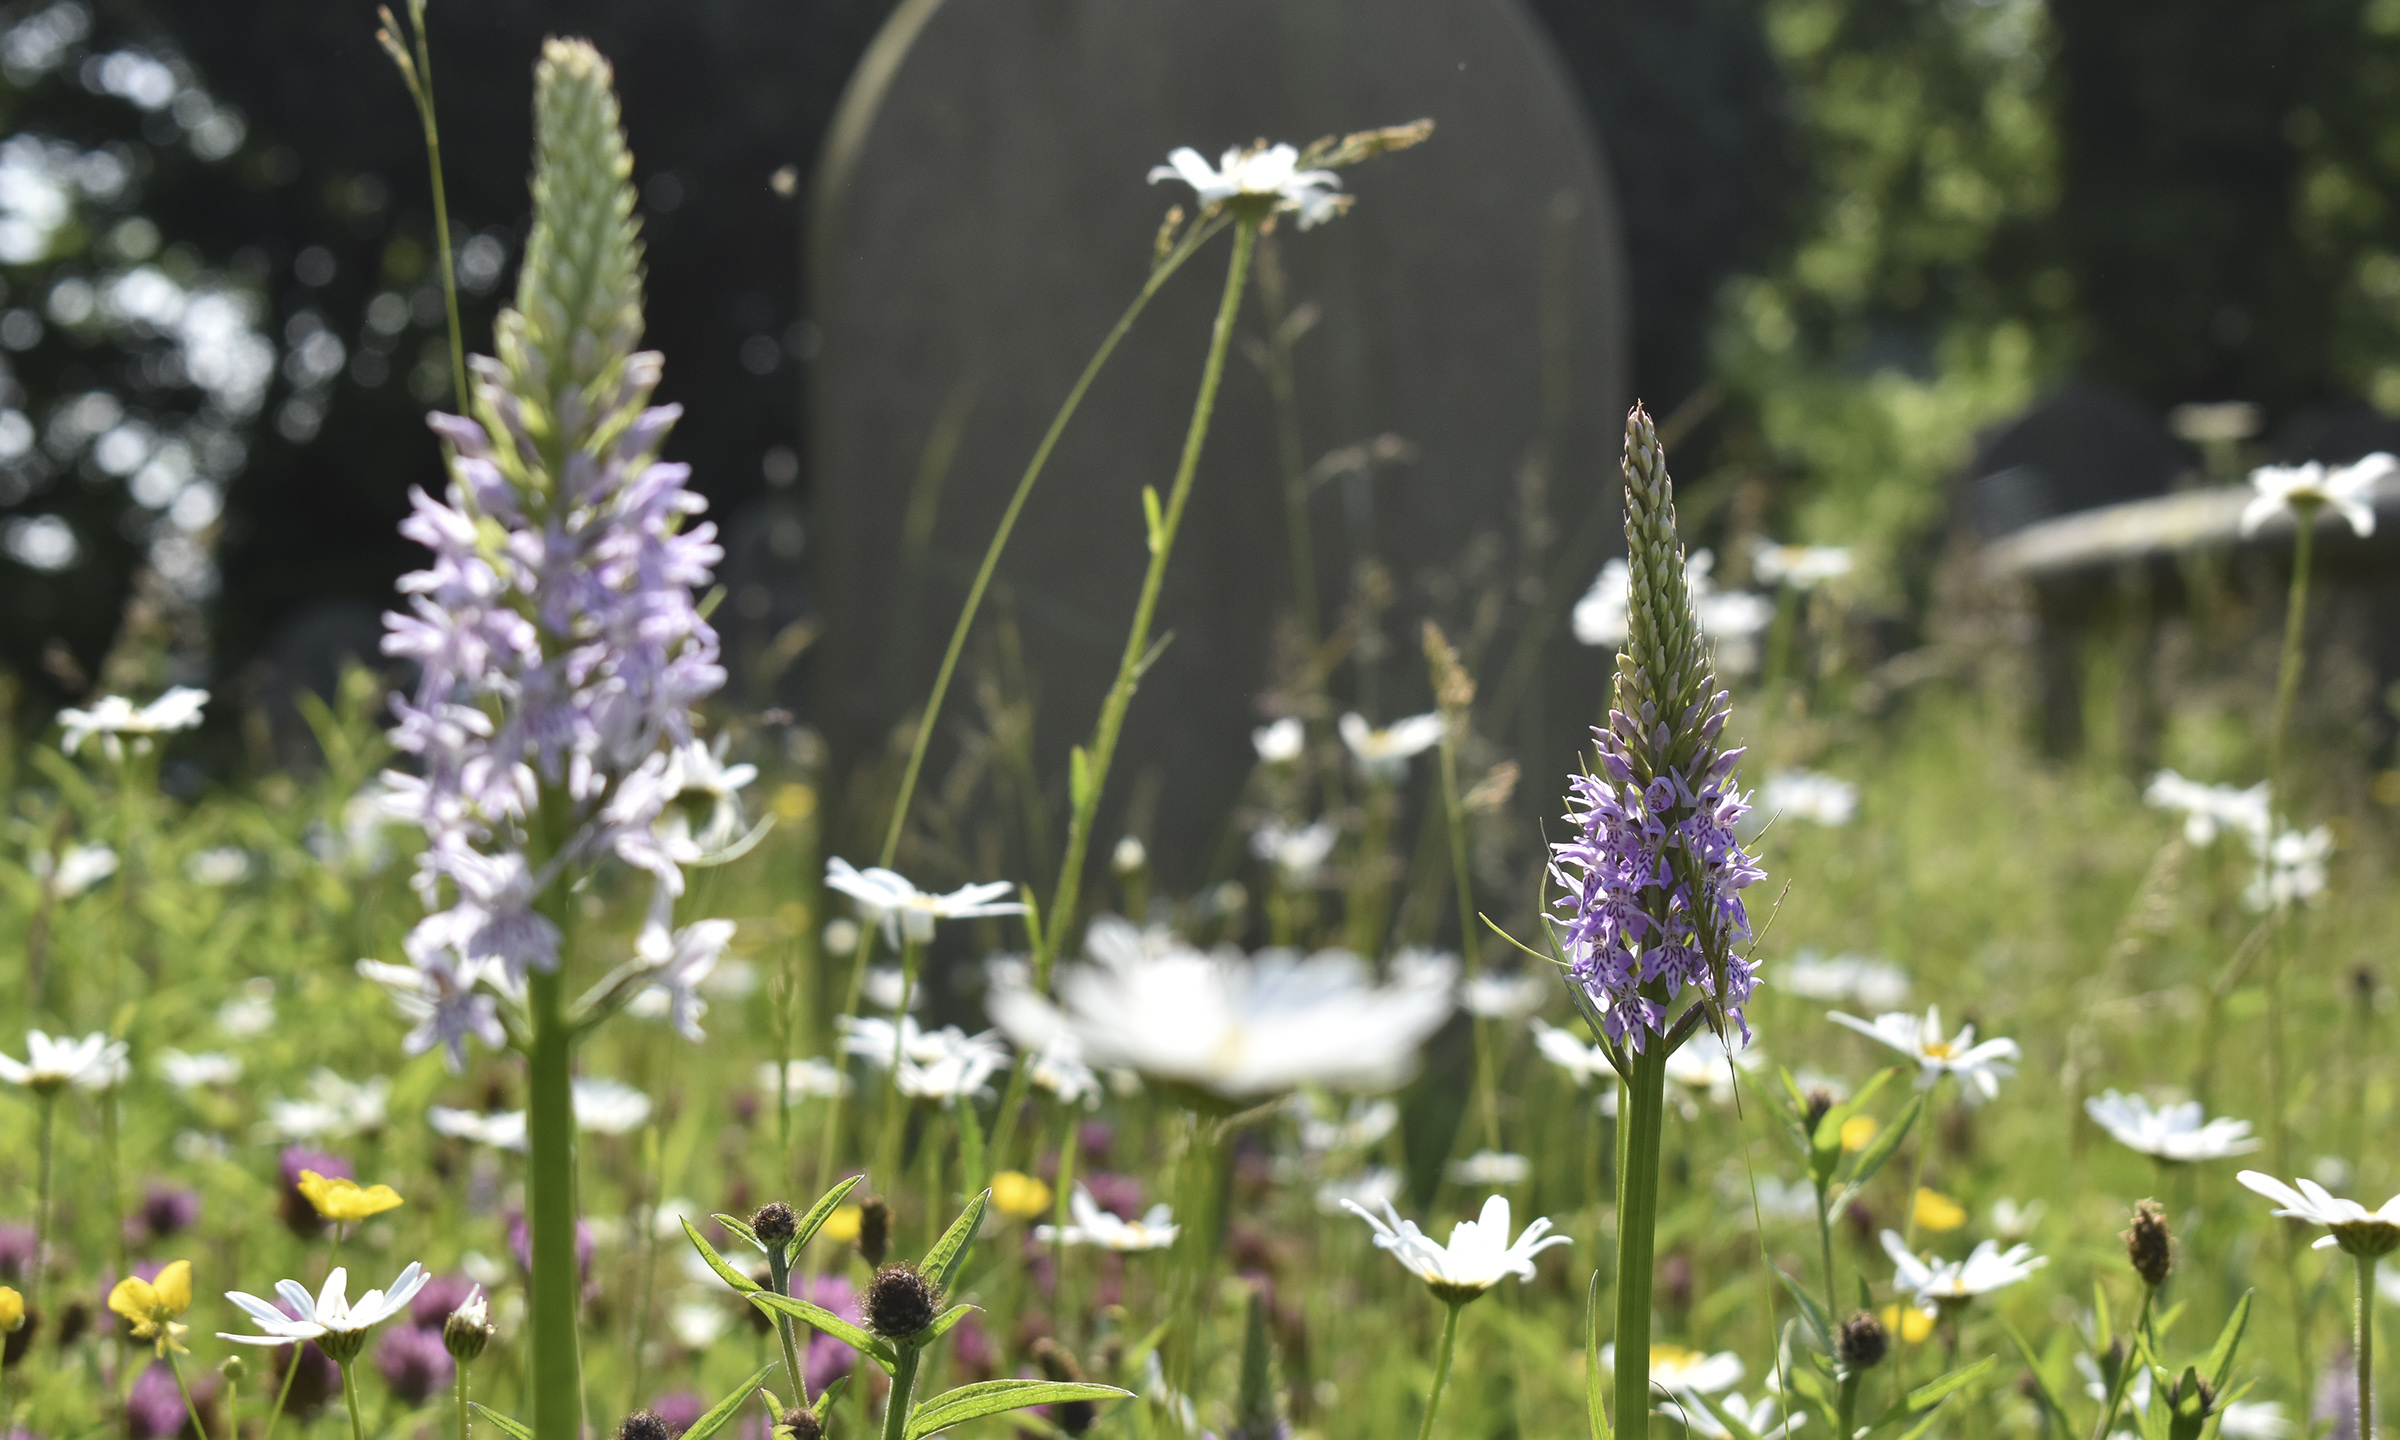 Top tips for managing your churchyard